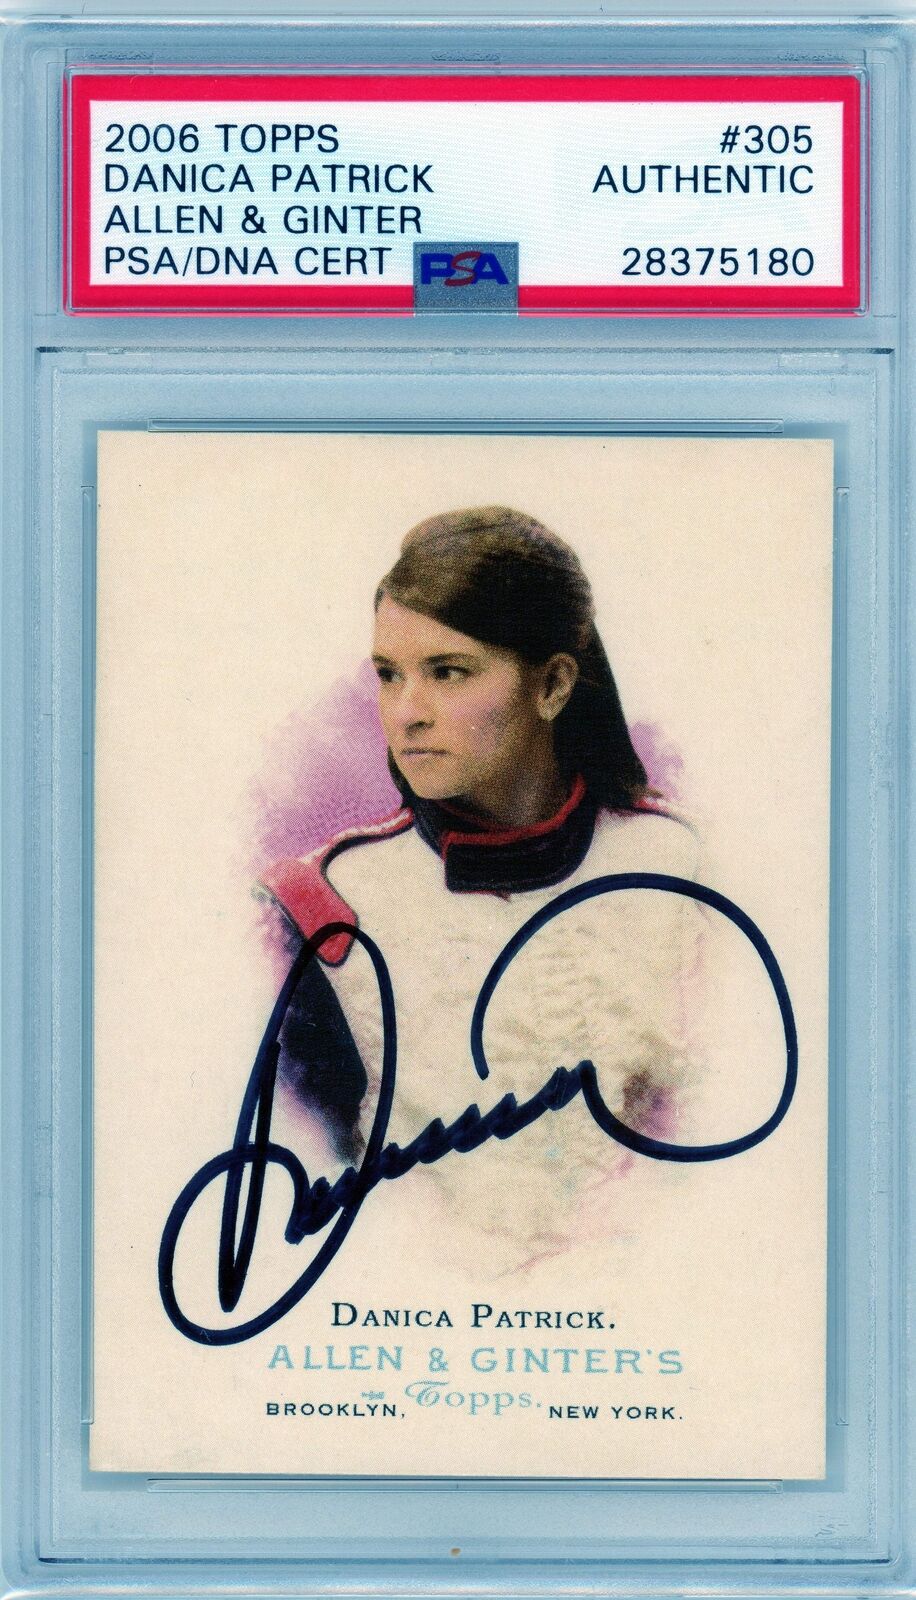 PSA Danica Patrick signed on card auto // Authentic 2006 Topps // Allen and Gint